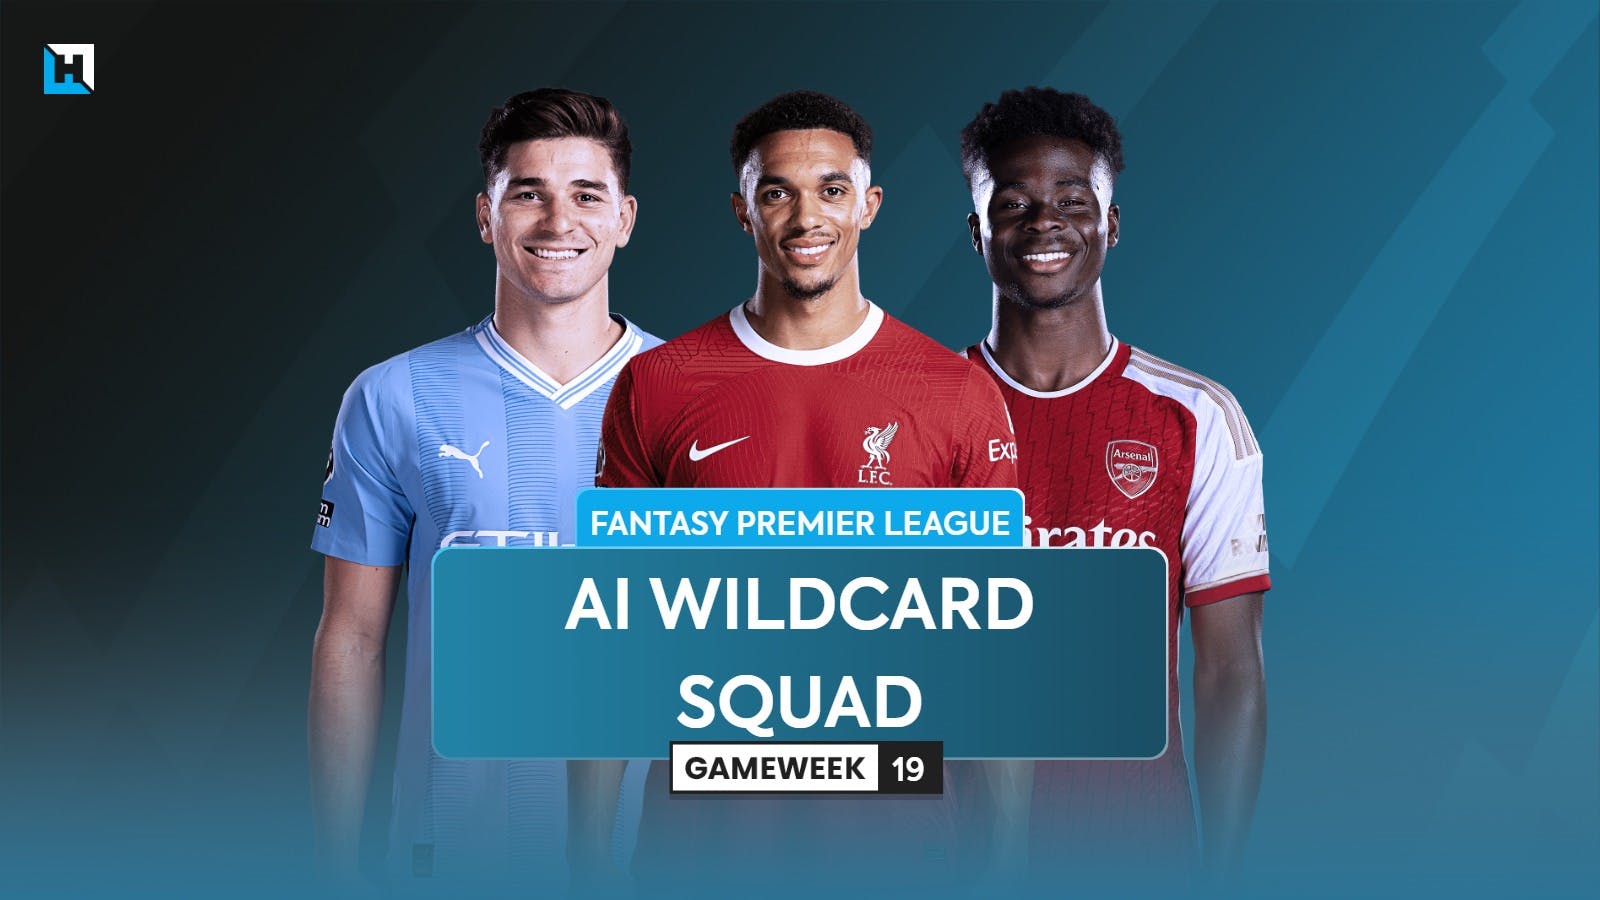 The best FPL Wildcard team for Gameweek 19 according to AI